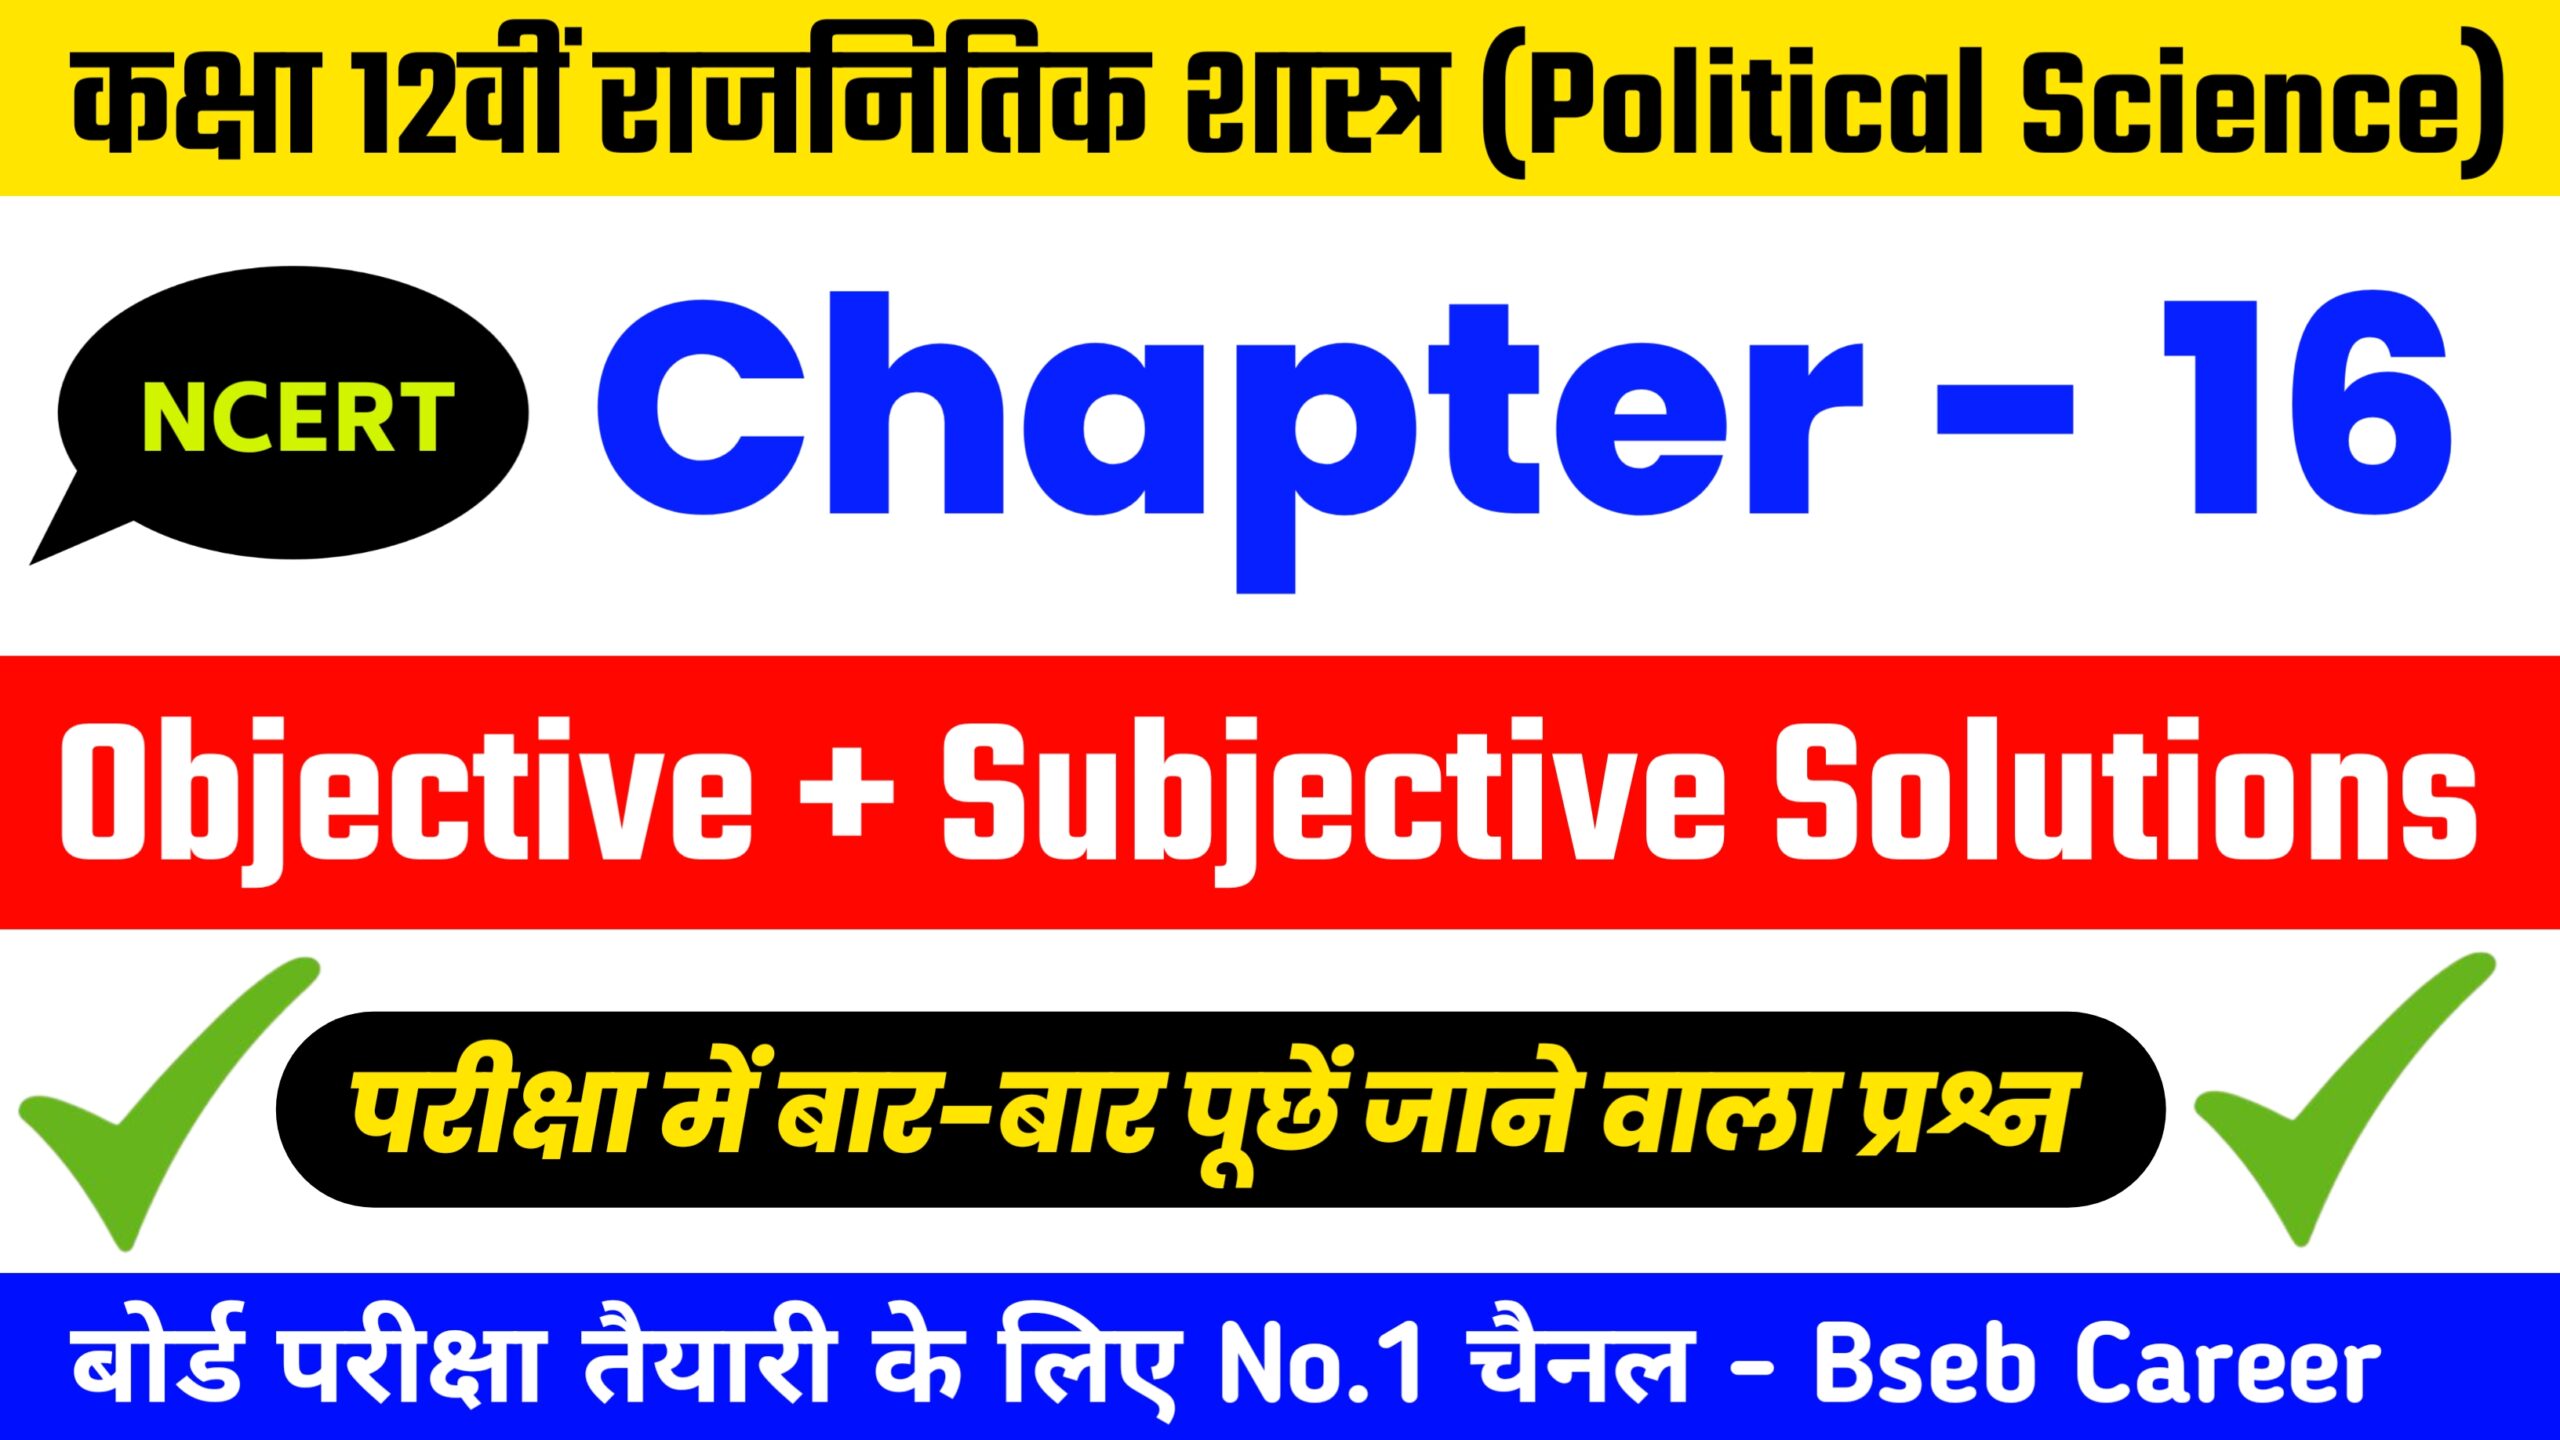 Class 12th Political Science Chapter 16 Solutions In Hindi, Class 12th Political Science Chapter 16 Objective And Subjective Question Answer.